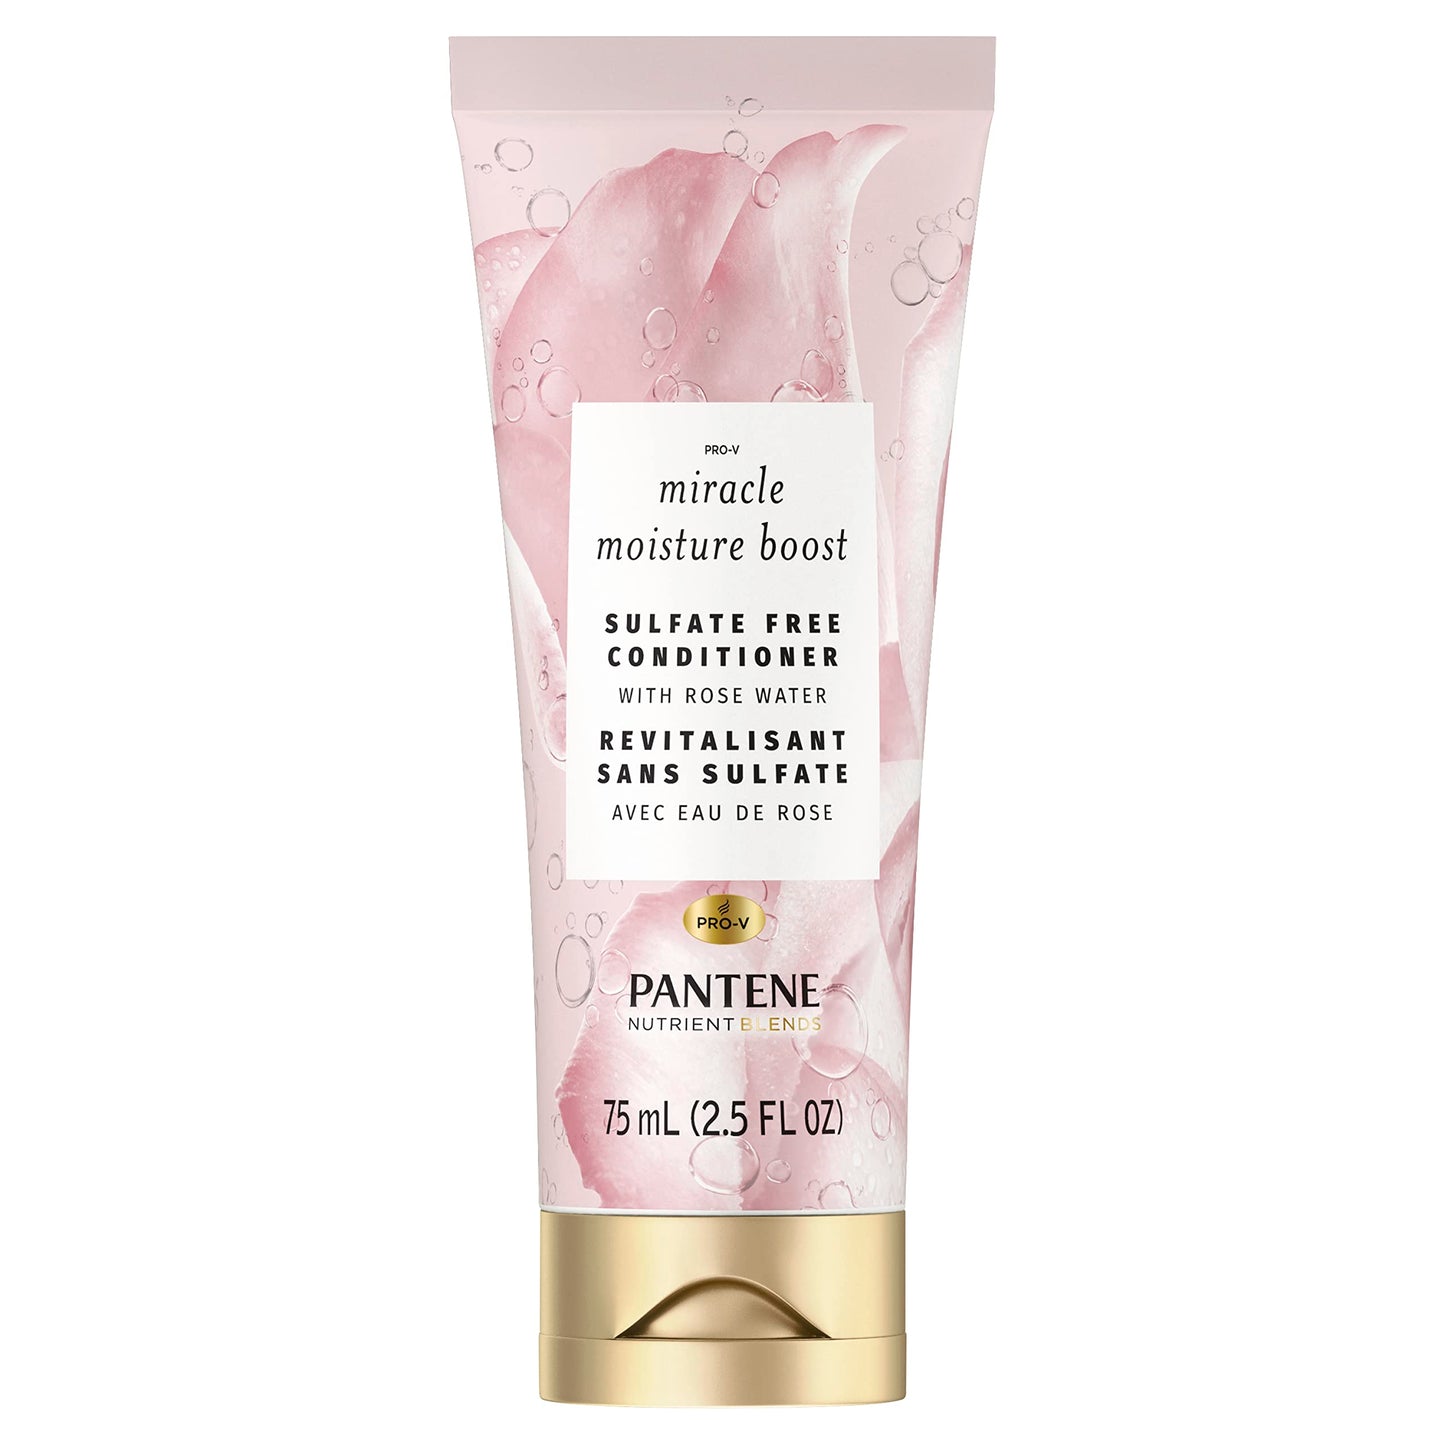 Pantene, Nutrient Blends Miracle Moisture Boost With Rose Water, 2.5 Fl Oz